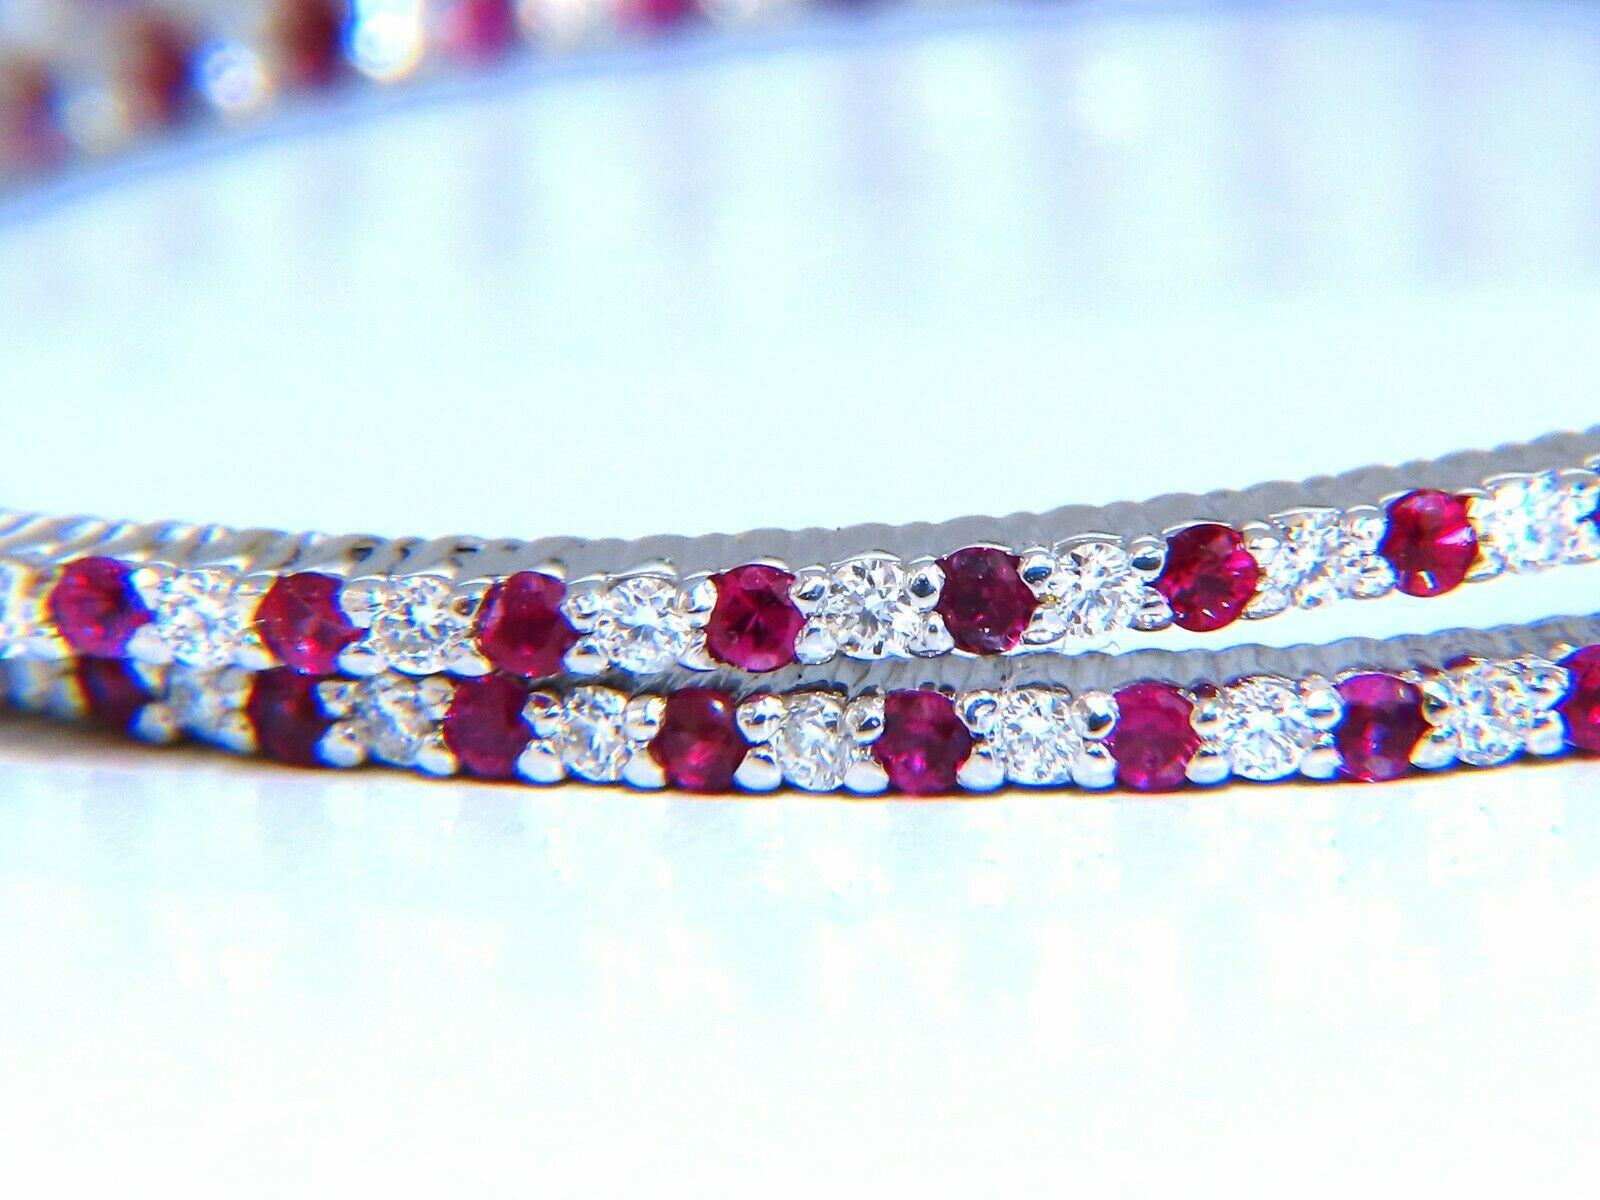 2.40ct Natural Ruby Diamonds Hoop Earrings 14kt White Gold Inside Out In New Condition For Sale In New York, NY